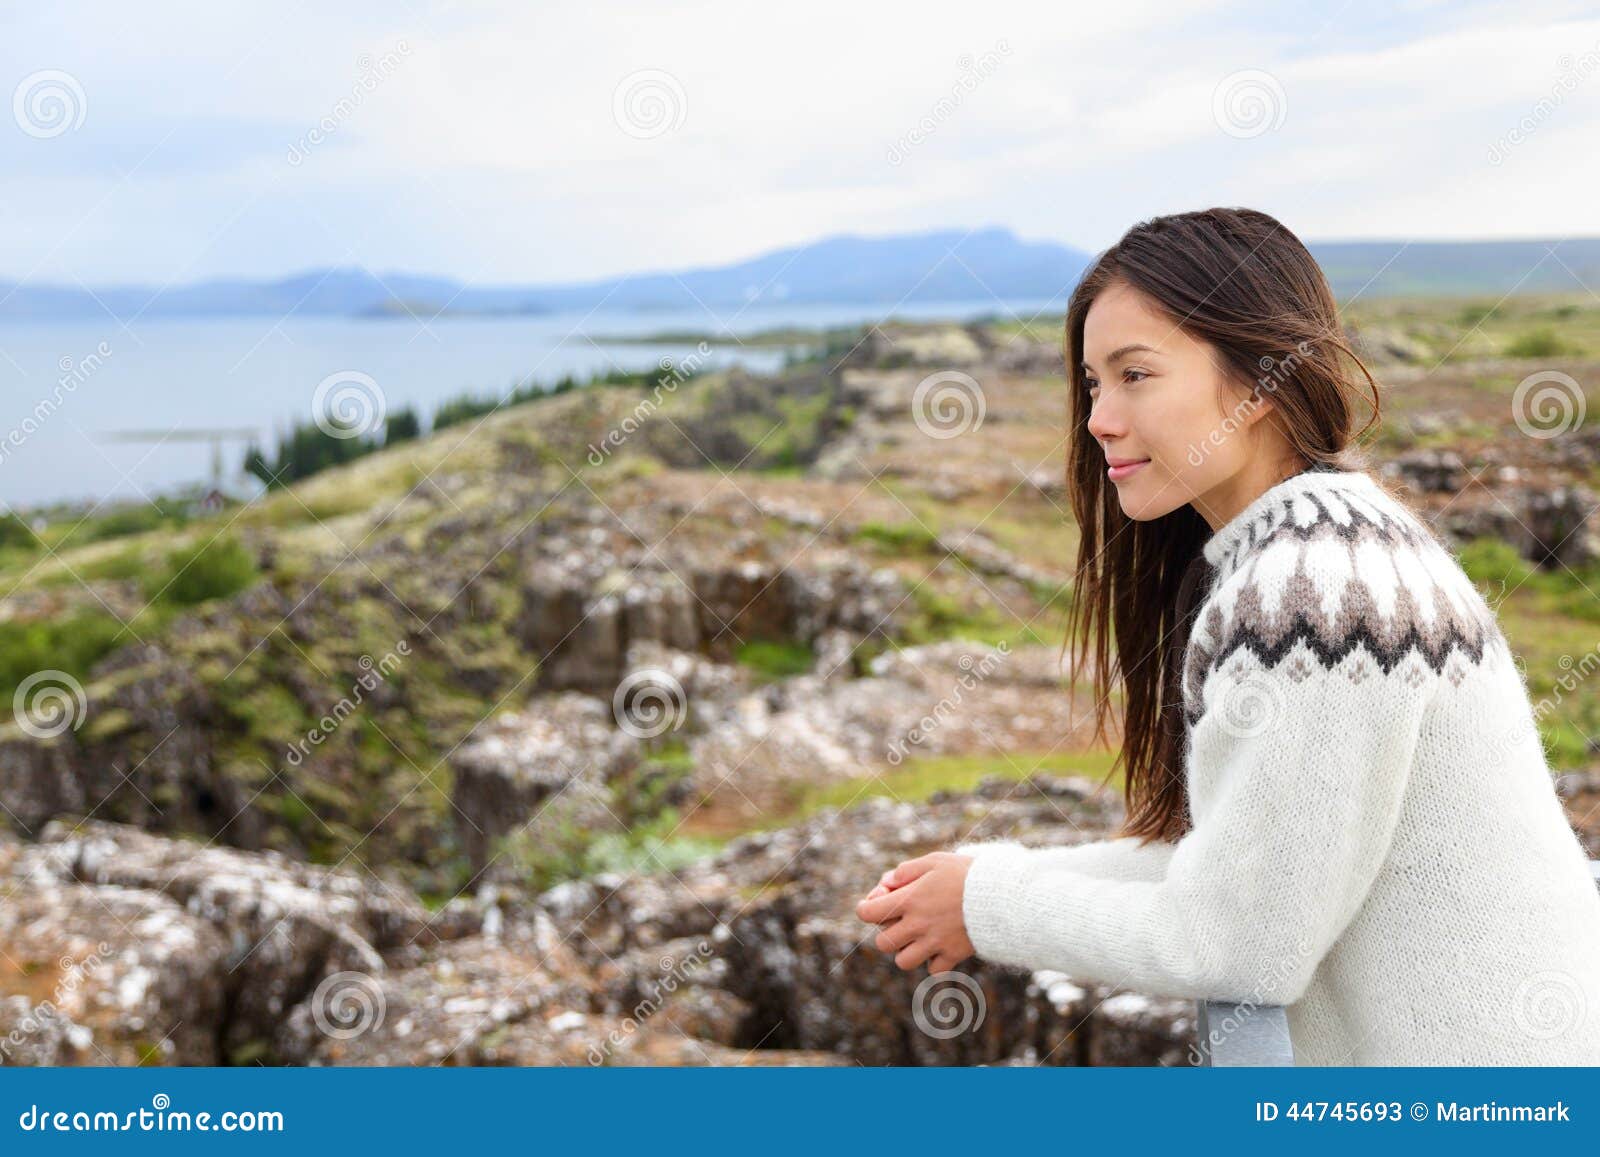 Iceland - Woman Looking at Thingvellir Althing Stock Image - Image of ...